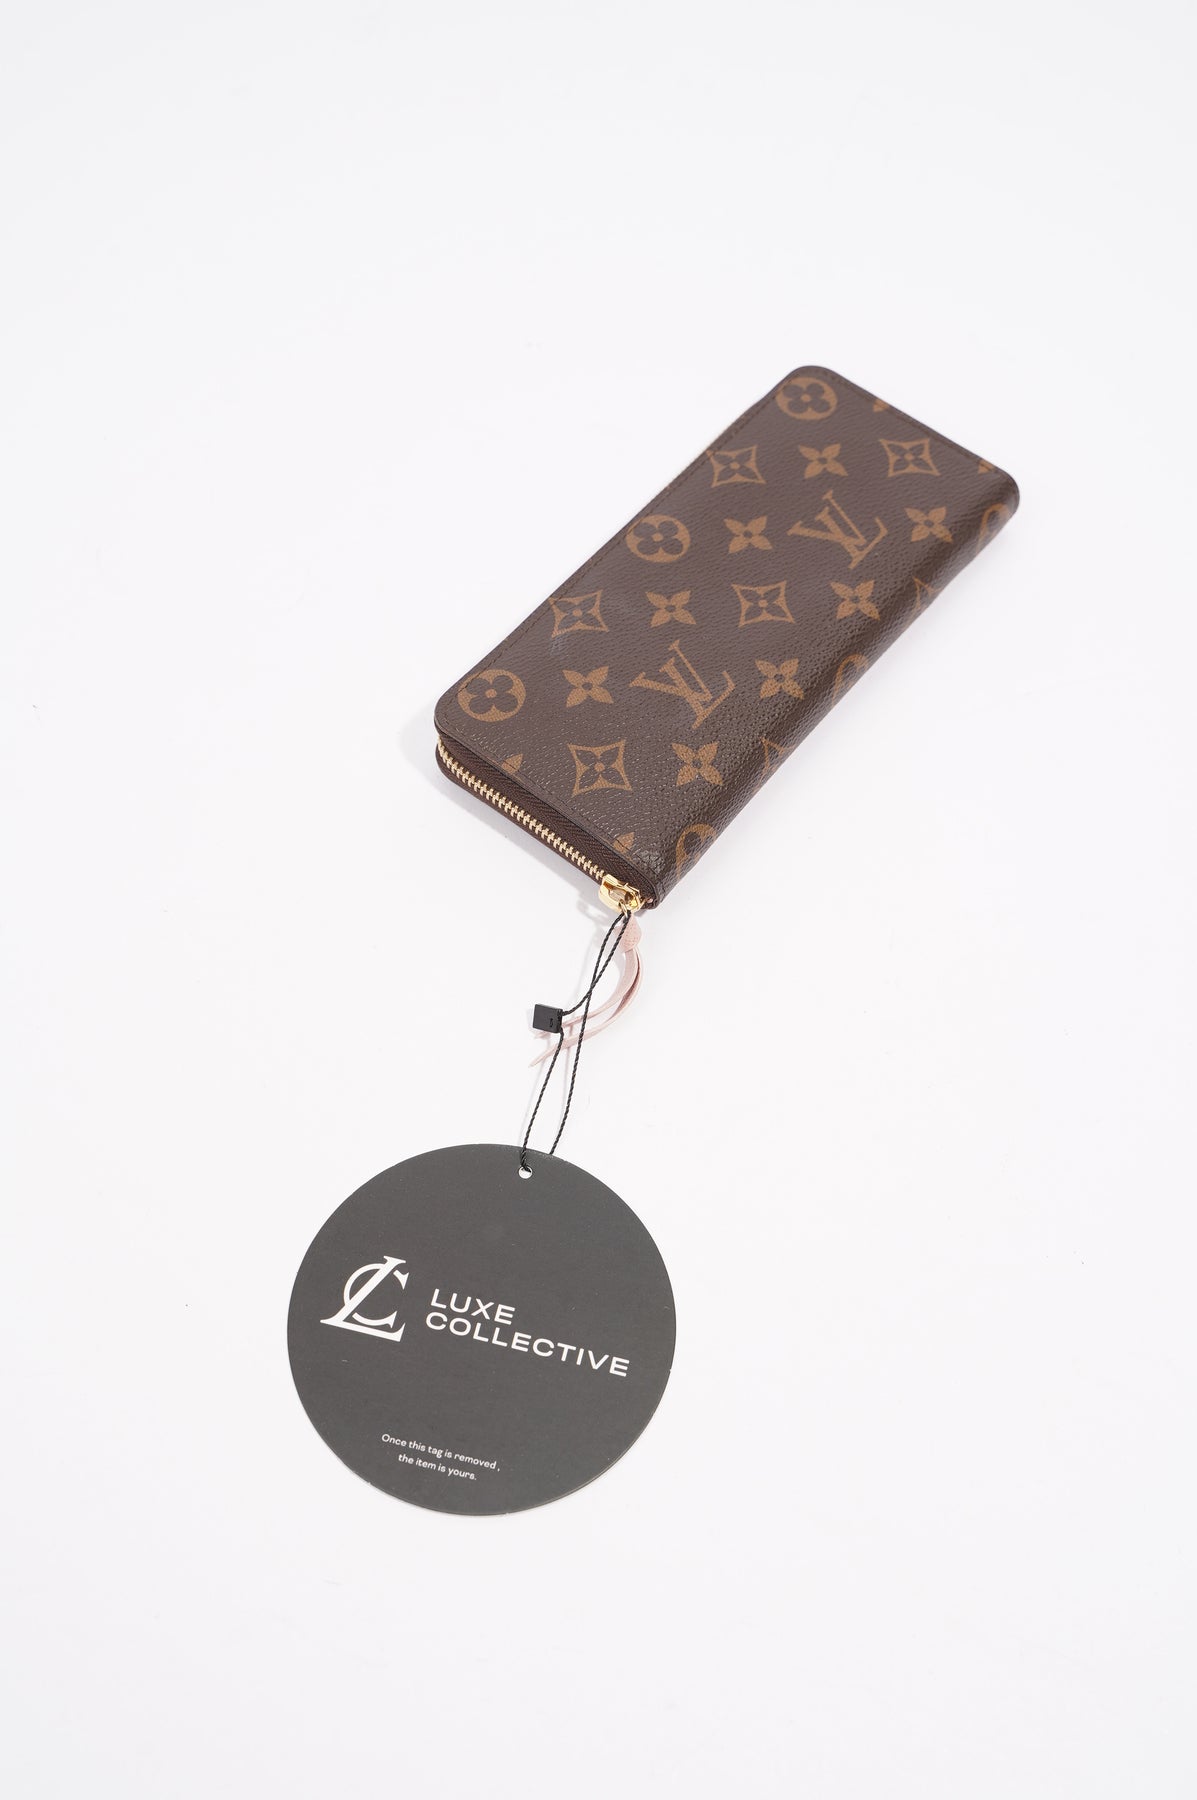 Monogram SMALL LEATHER GOODS WALLETS Clemence Wallet, Louis Vuitton ®